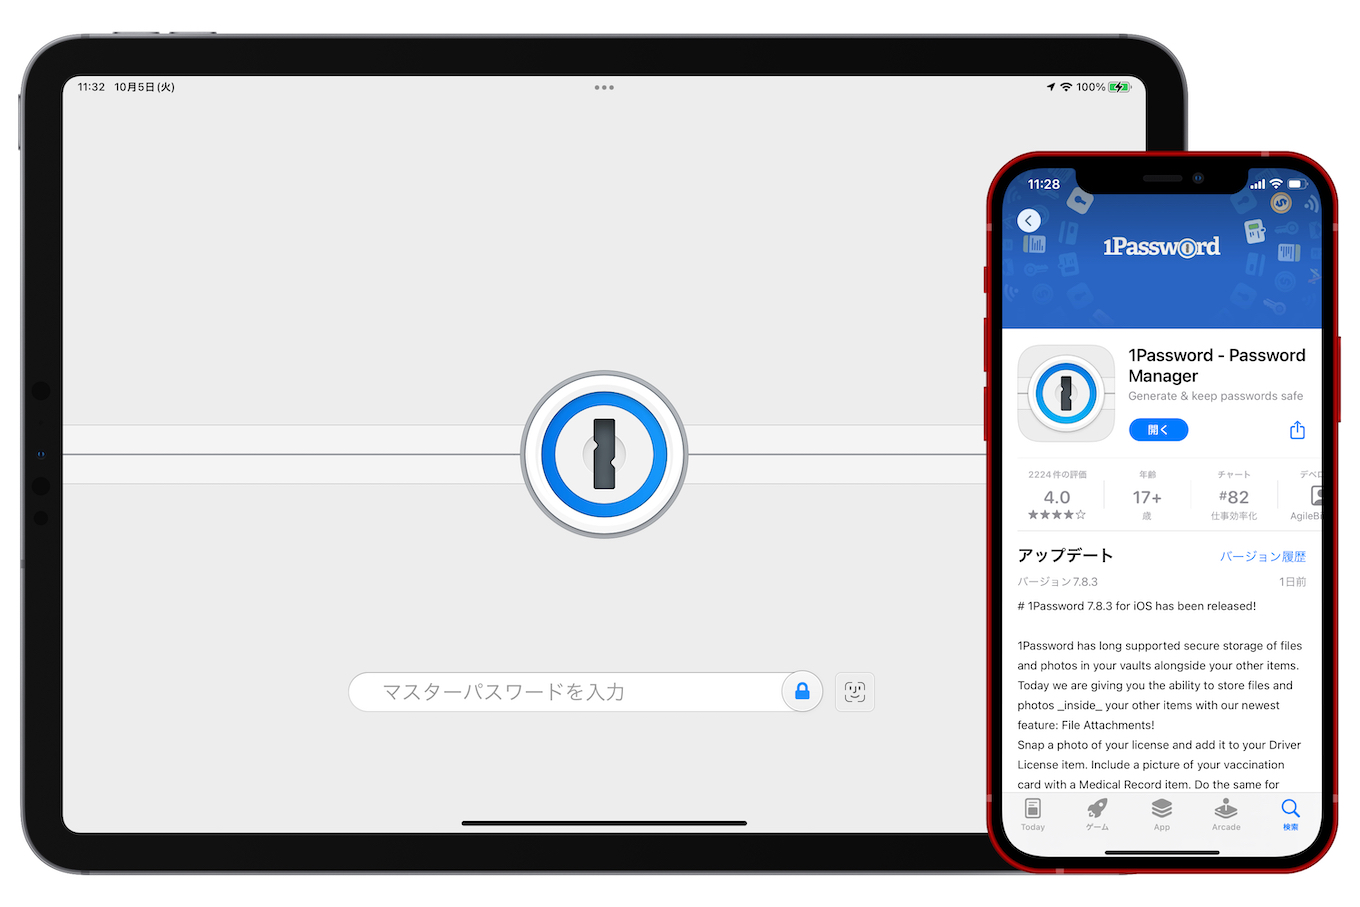 1Password for iOS file atttchments